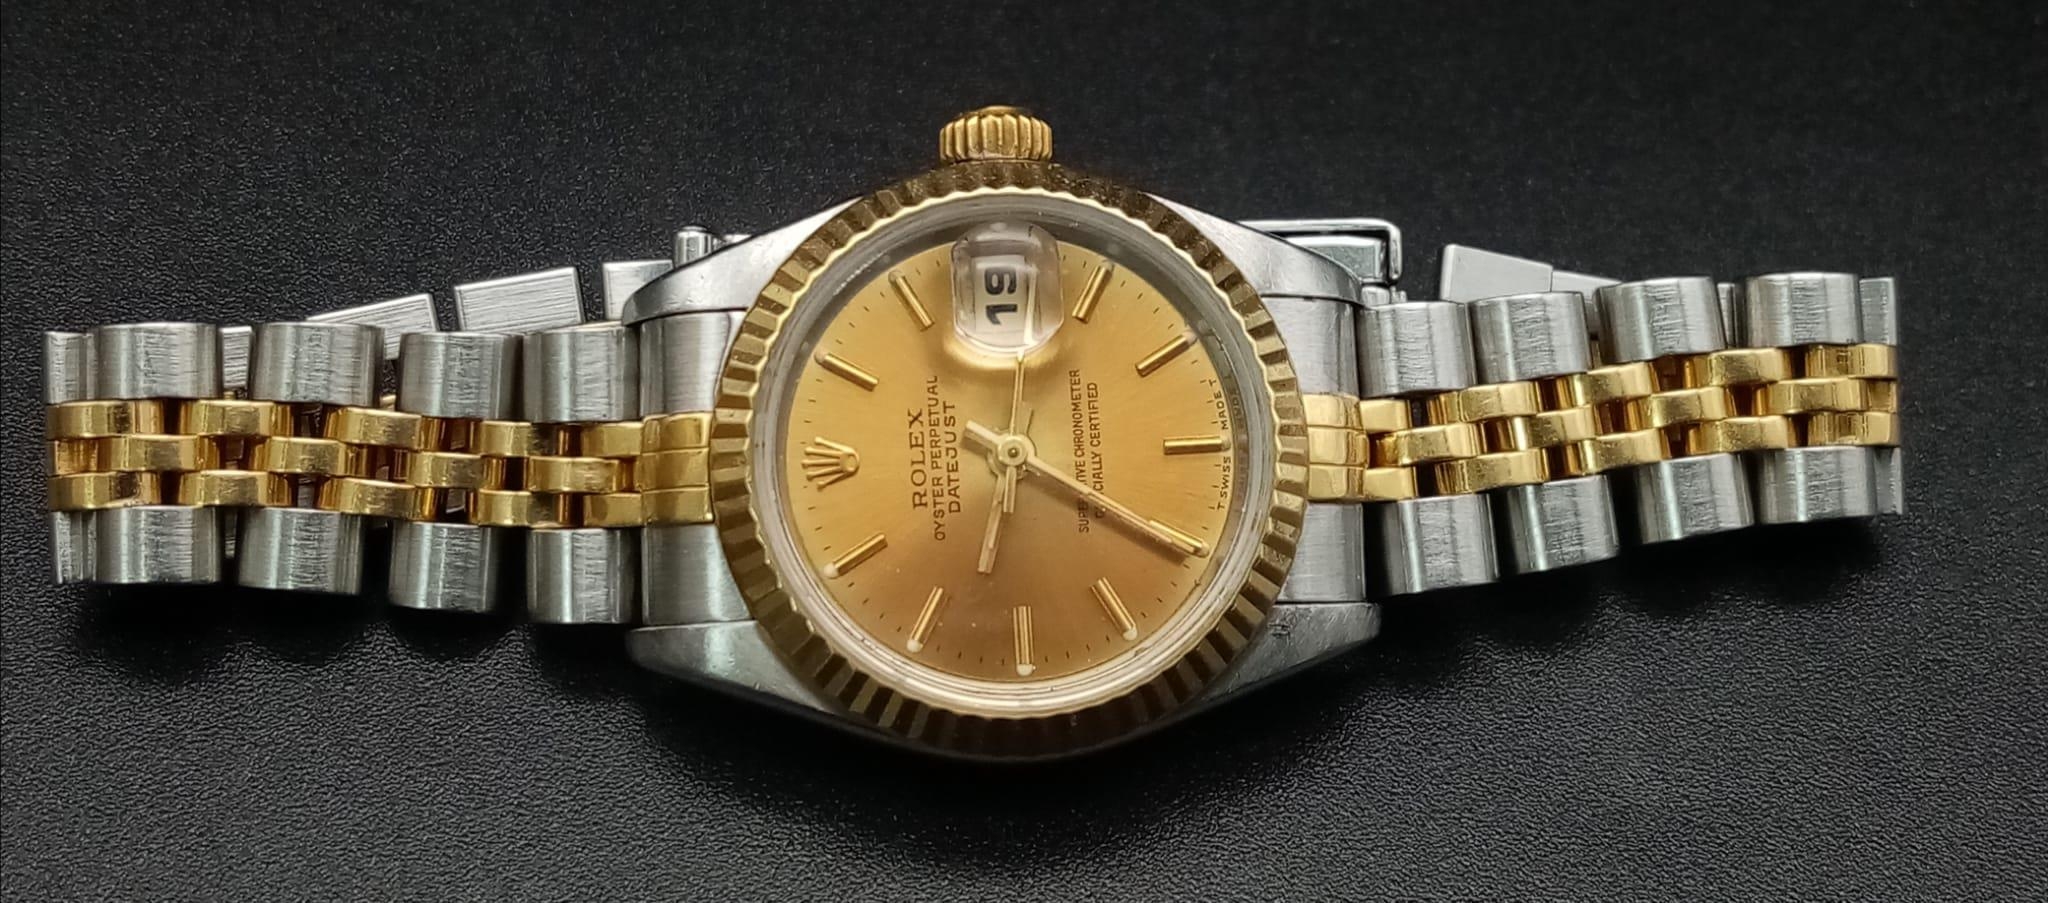 A Rolex Oyster Perpetual Datejust Ladies Watch. Bi-metal strap and case - 26mm. Gold tone dial - Image 8 of 13